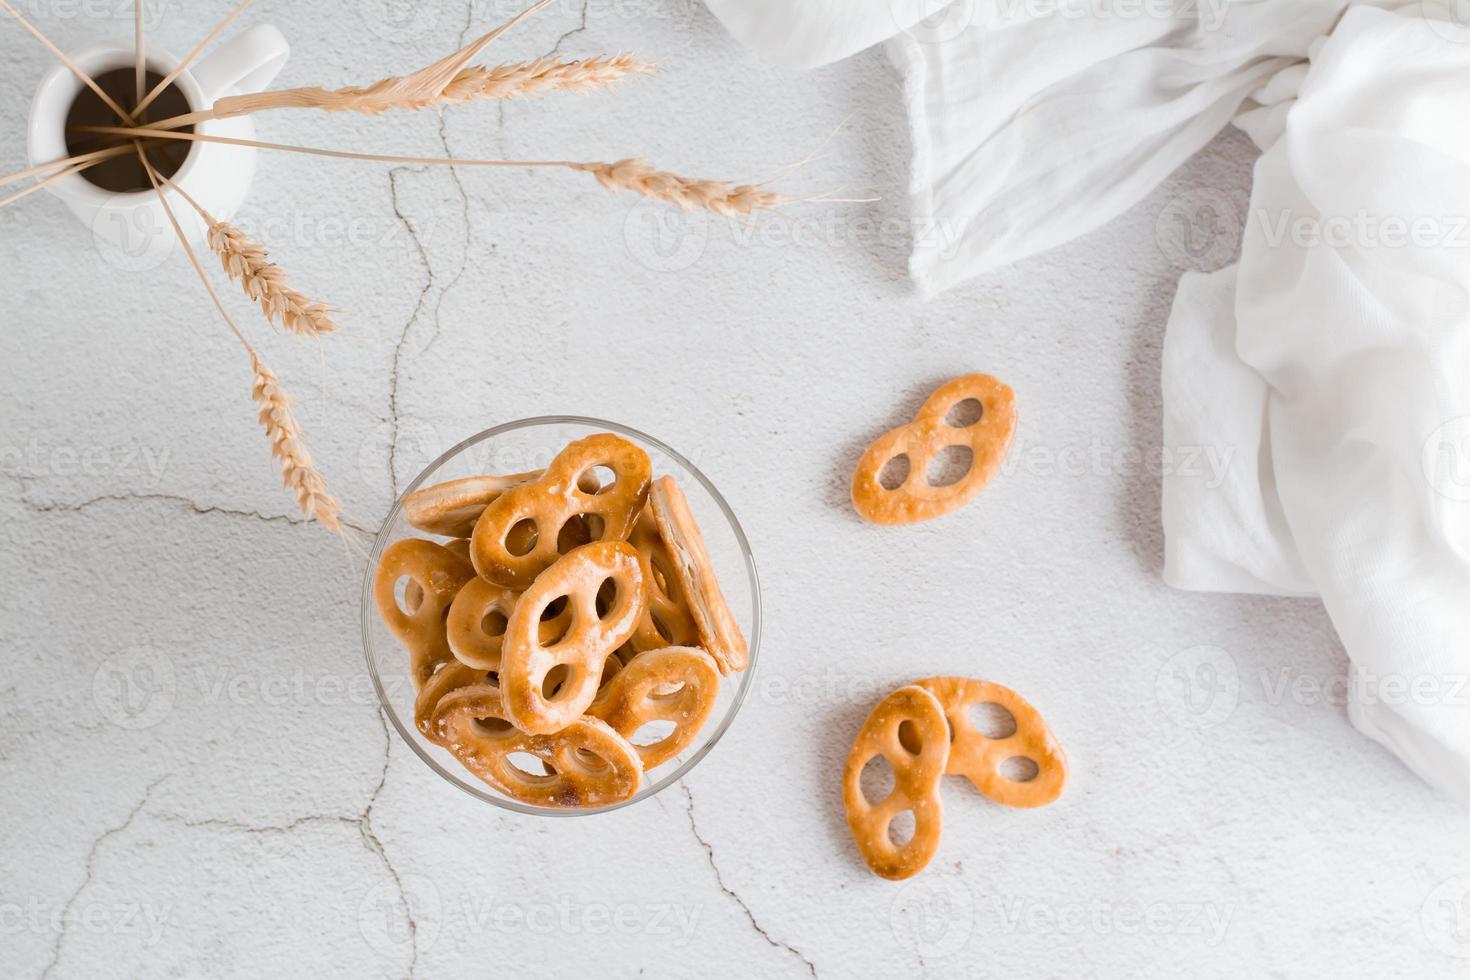 Bavarian pretzels in a glass bowl on the table. Snack for fast food. Top view photo